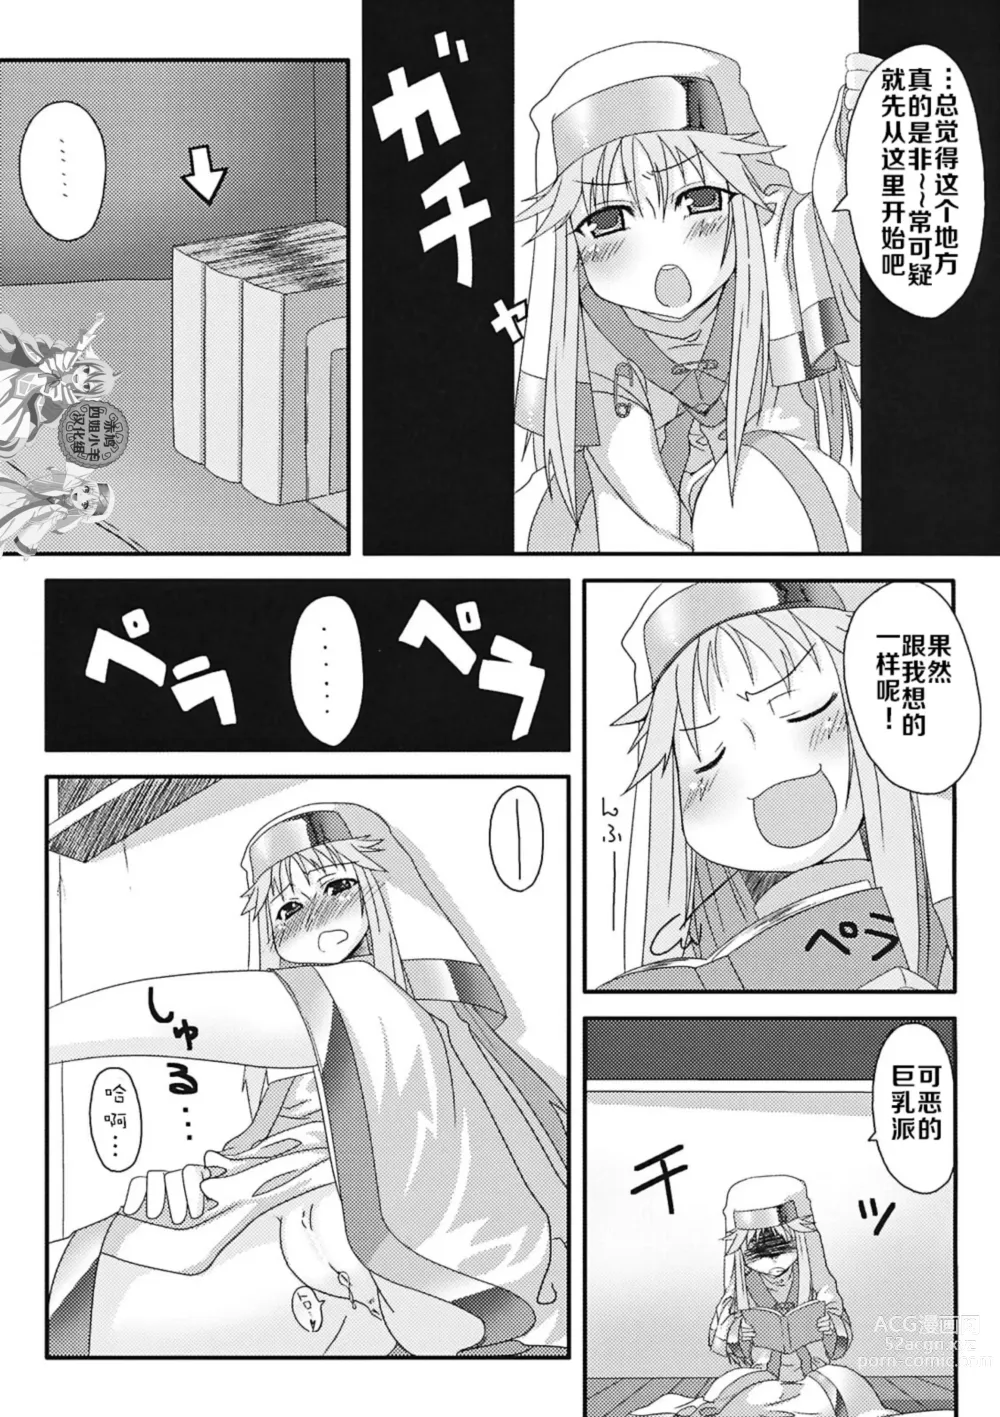 Page 17 of doujinshi 茵蒂克丝的那个哦